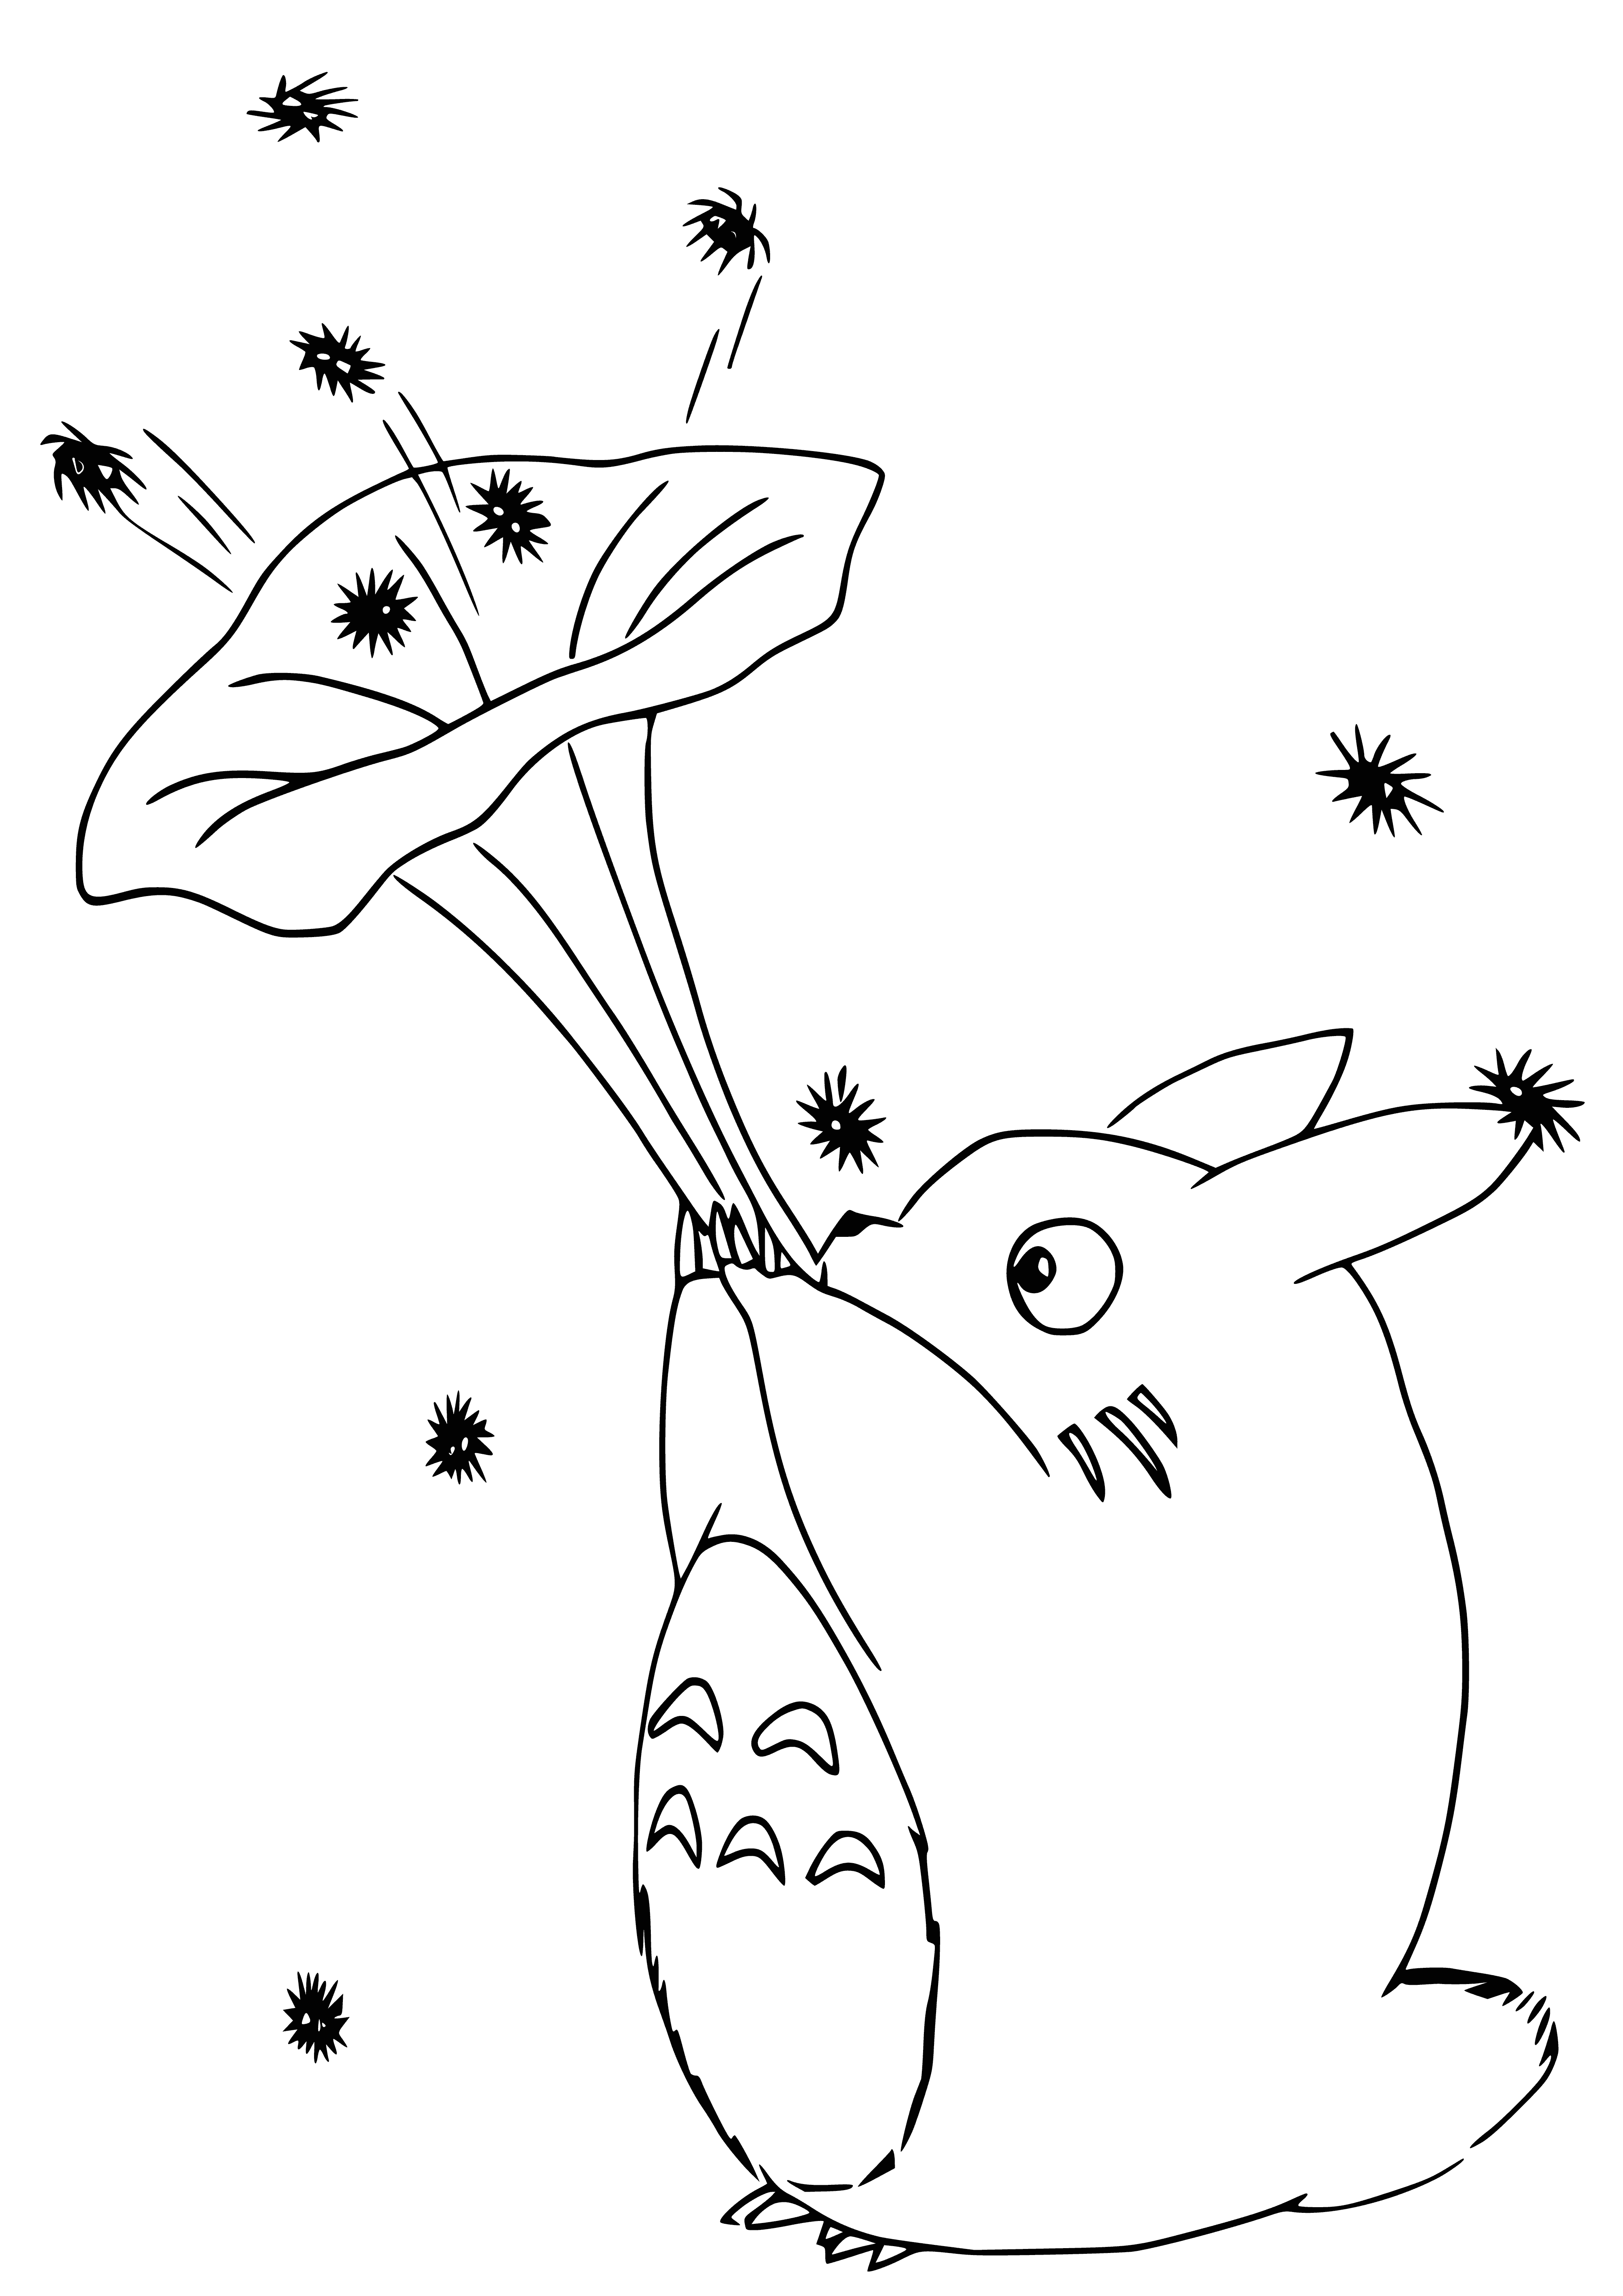 coloring page: A large blue and white creature with a long body, short tail, black eyes, white gloves, and small black hat sits in a tree.